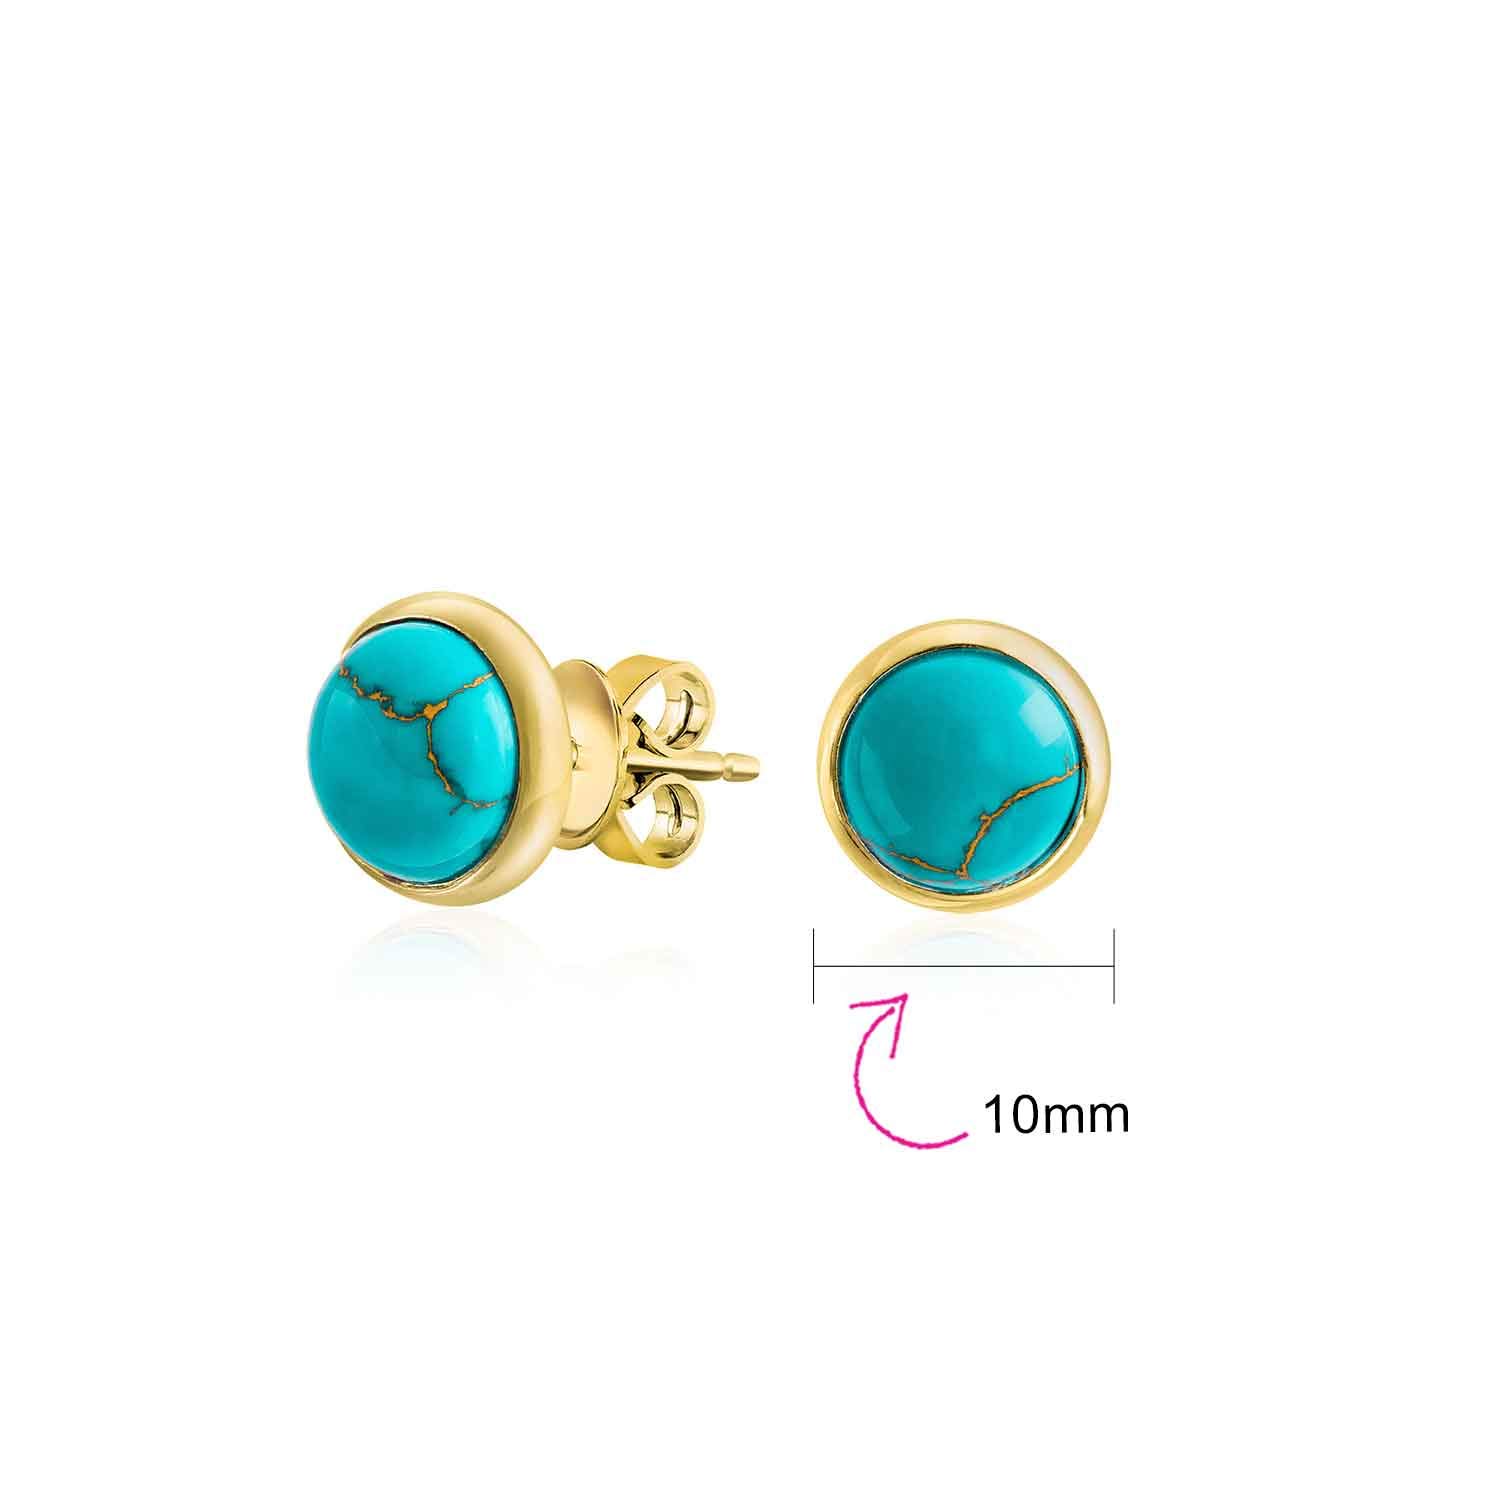 Simple Semi Precious Gemstone Created Blue Lapis Turquoise Black Onyx Bezel Set Round Dome Button Stud Earrings For Women Yellow 14K Gold Plated .925 Sterling Silver